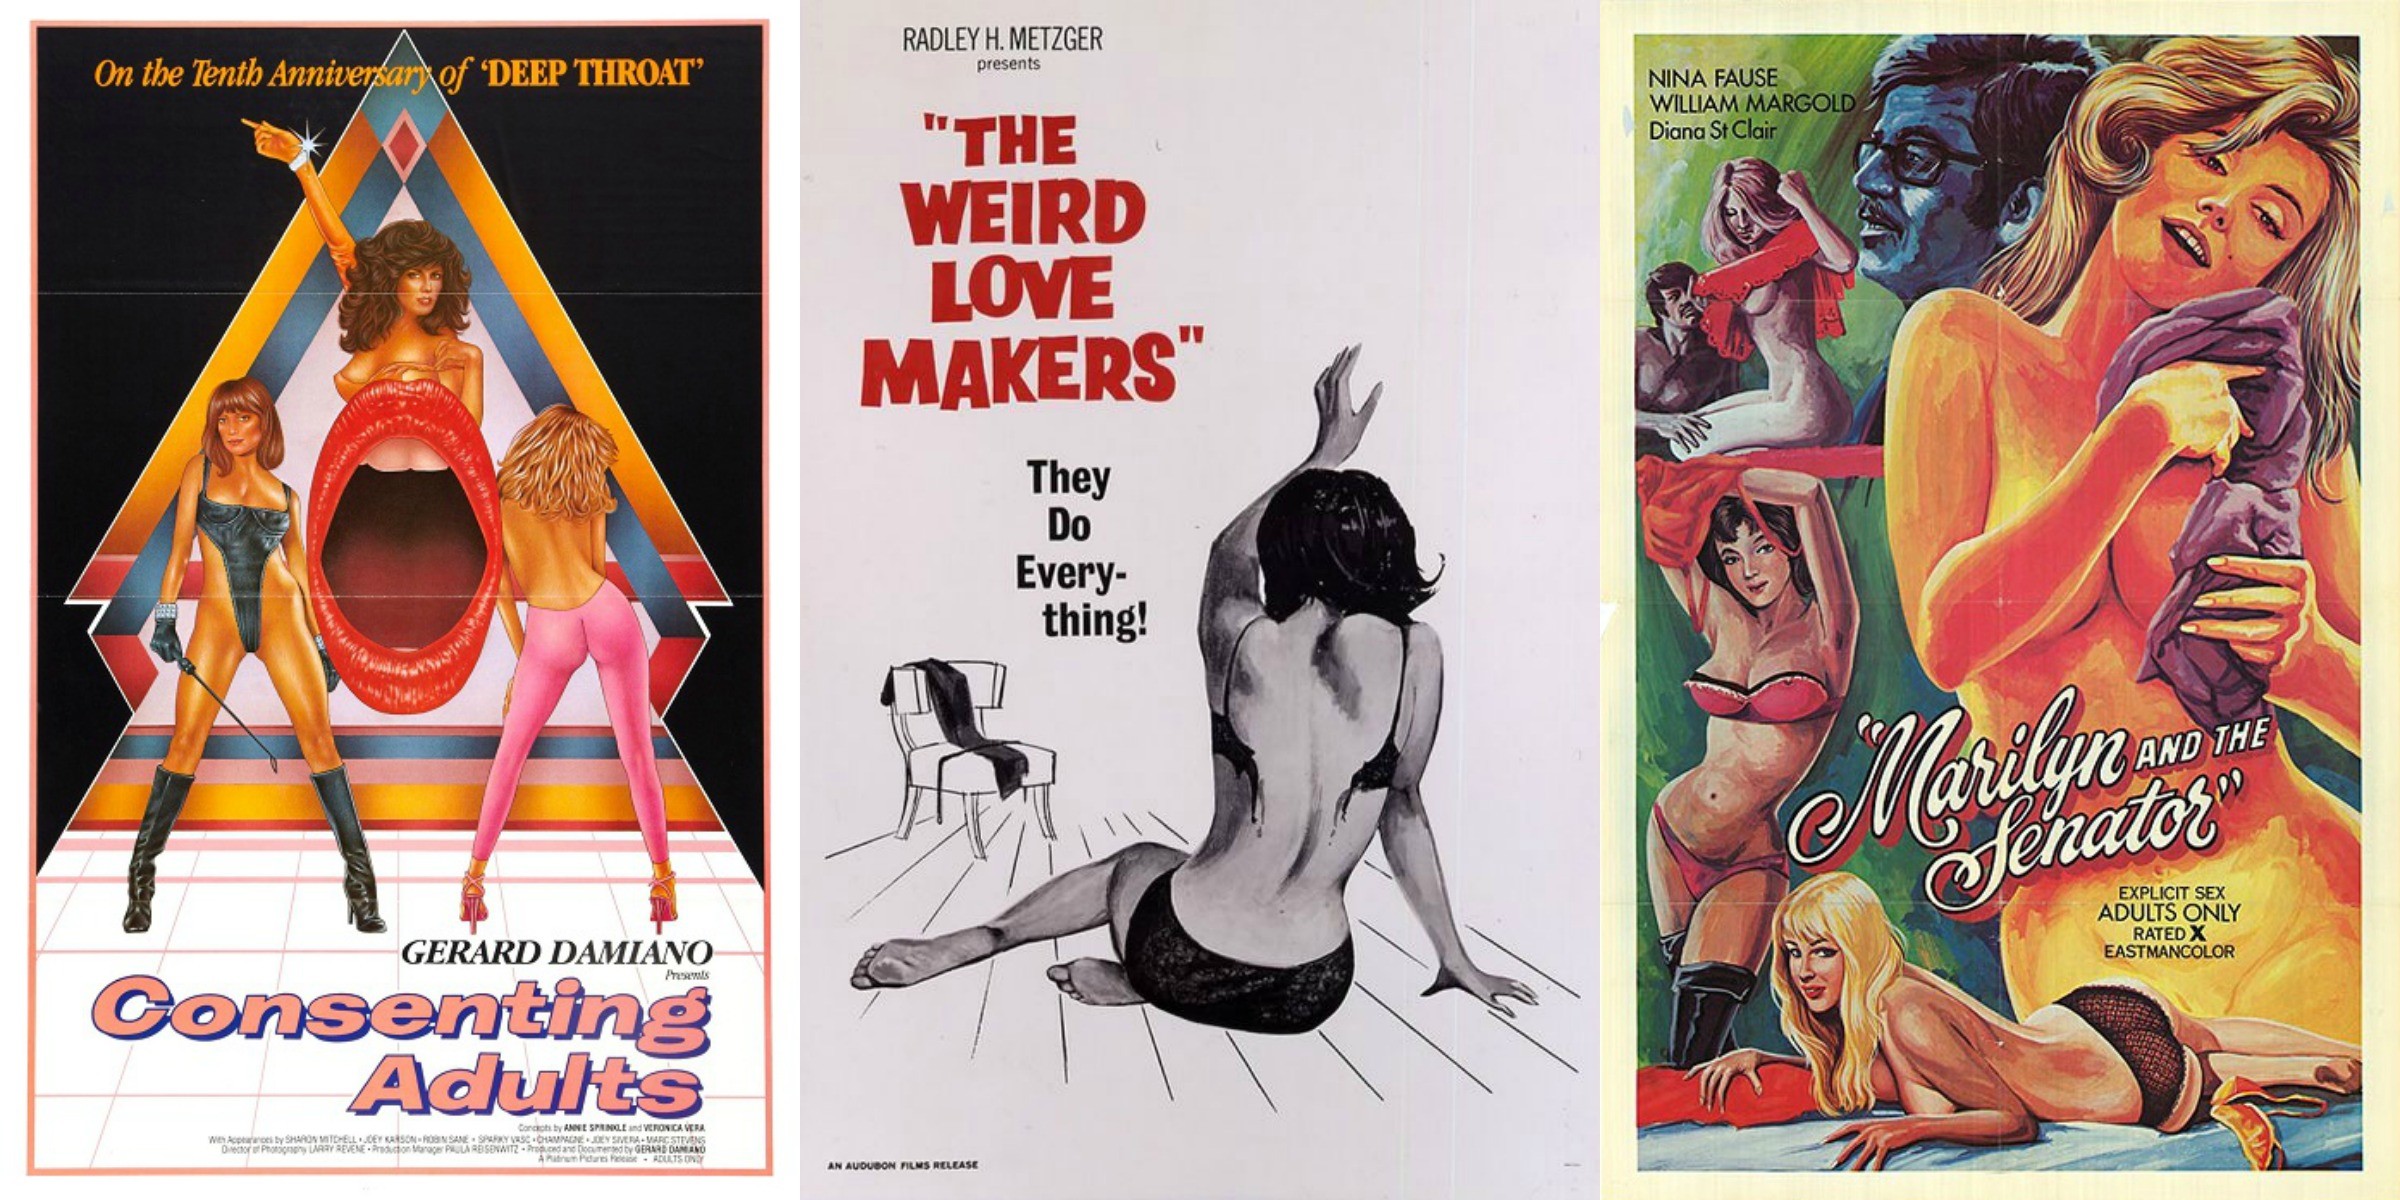 70s Adult Xxx - Erotic adult movie posters from the 60s and 70s | City Magazine